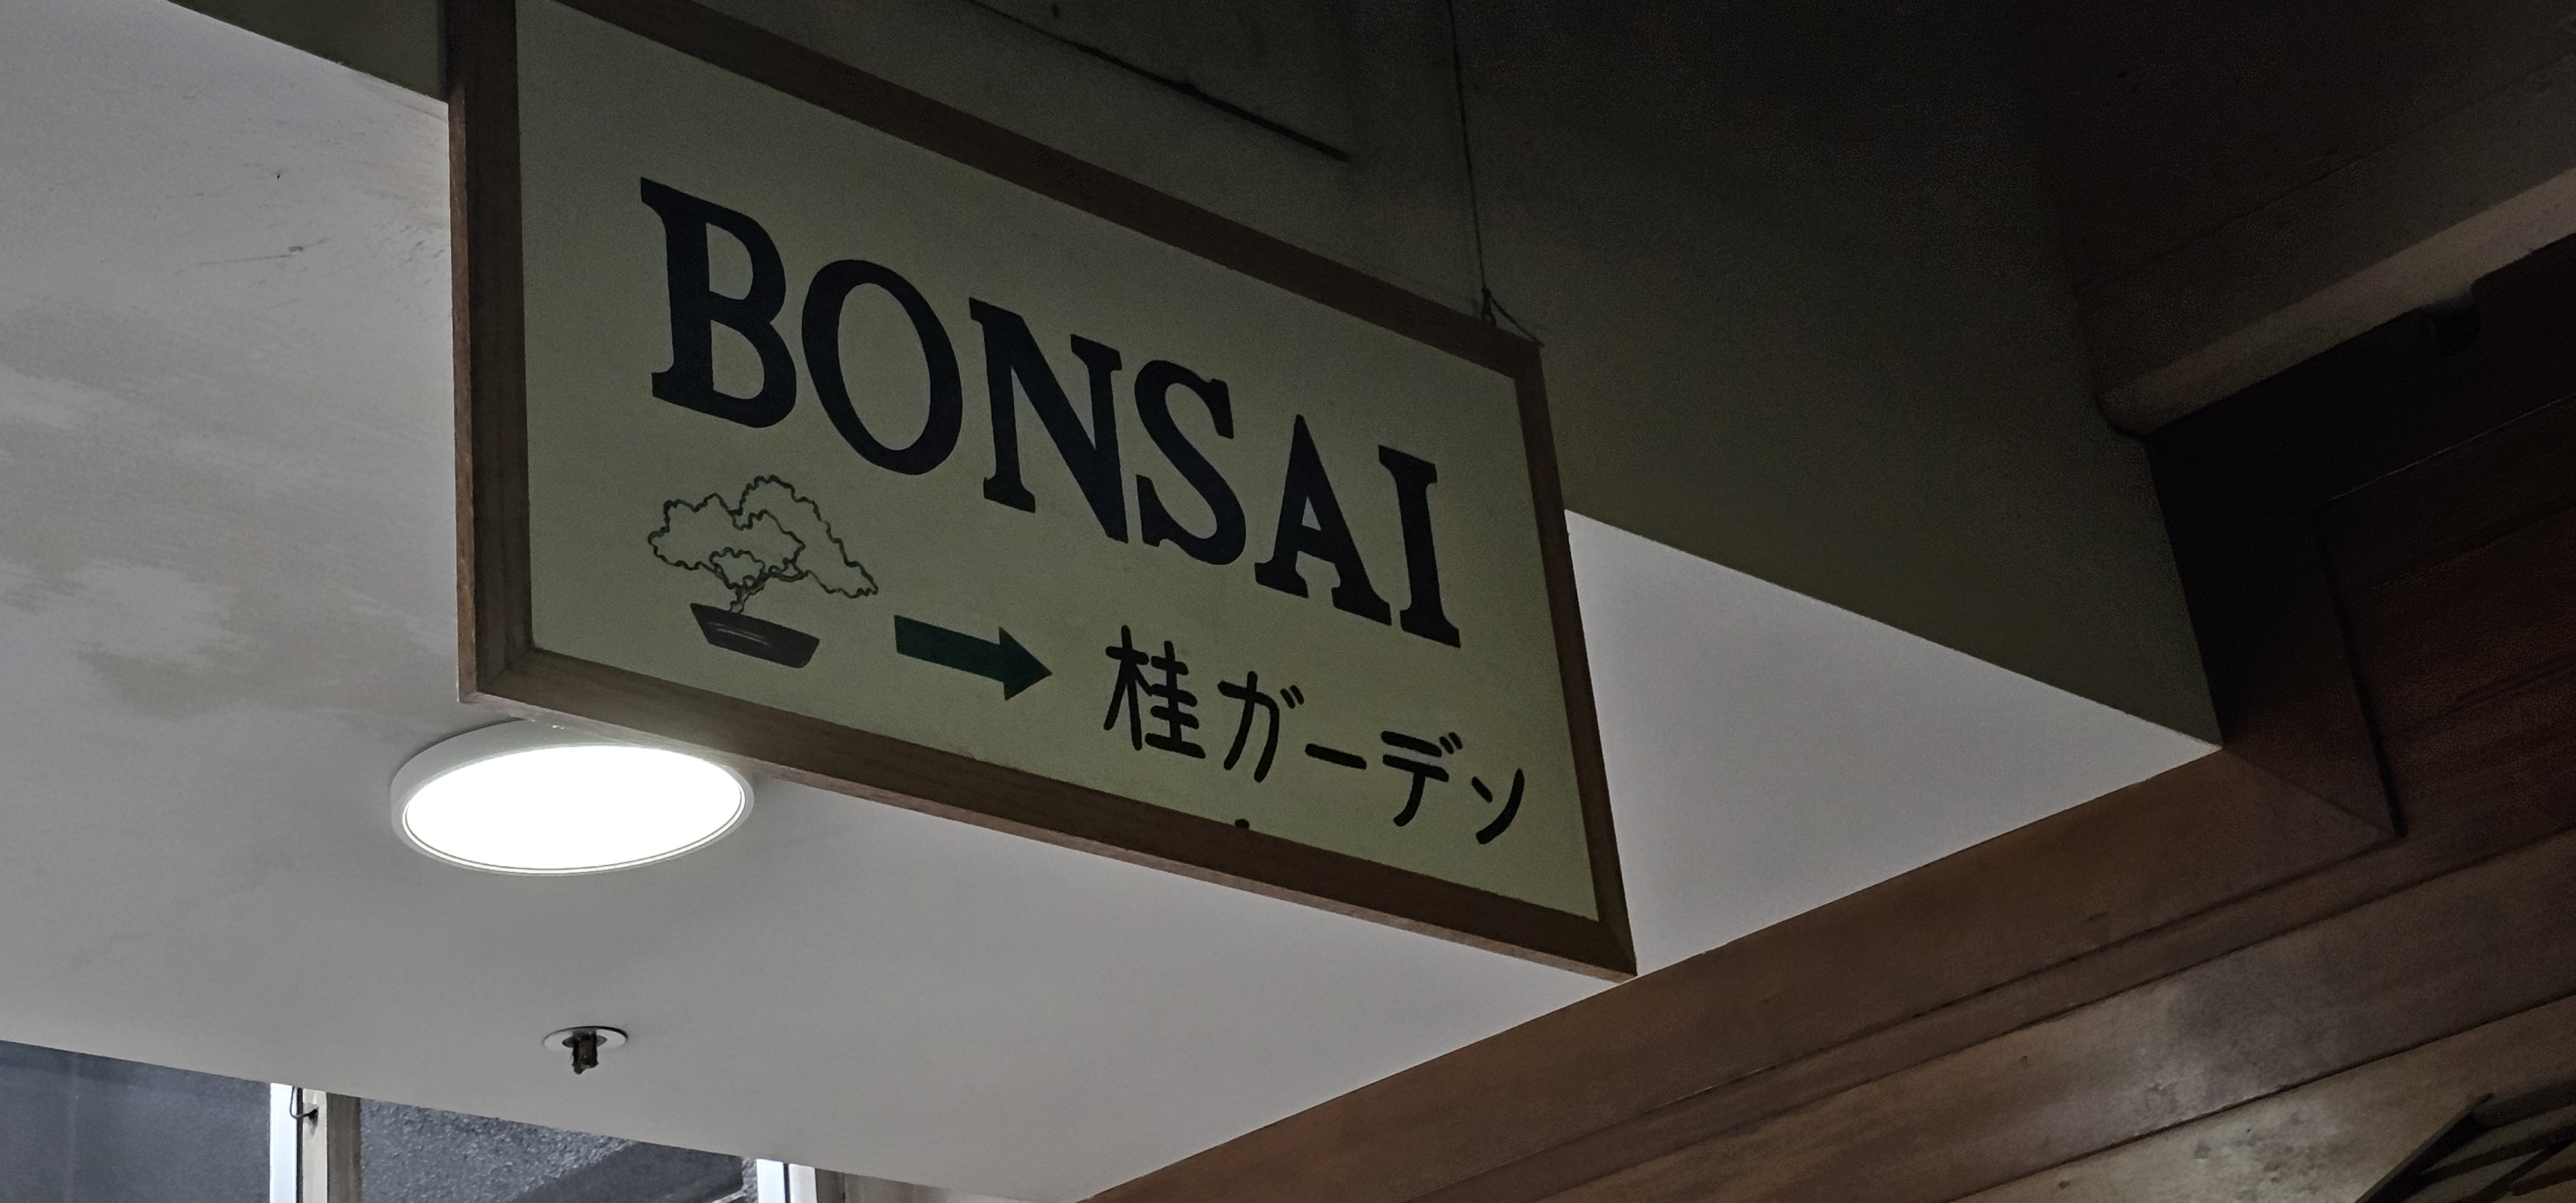 Picture of a sign at a store with the word Bonsai written in the middle.